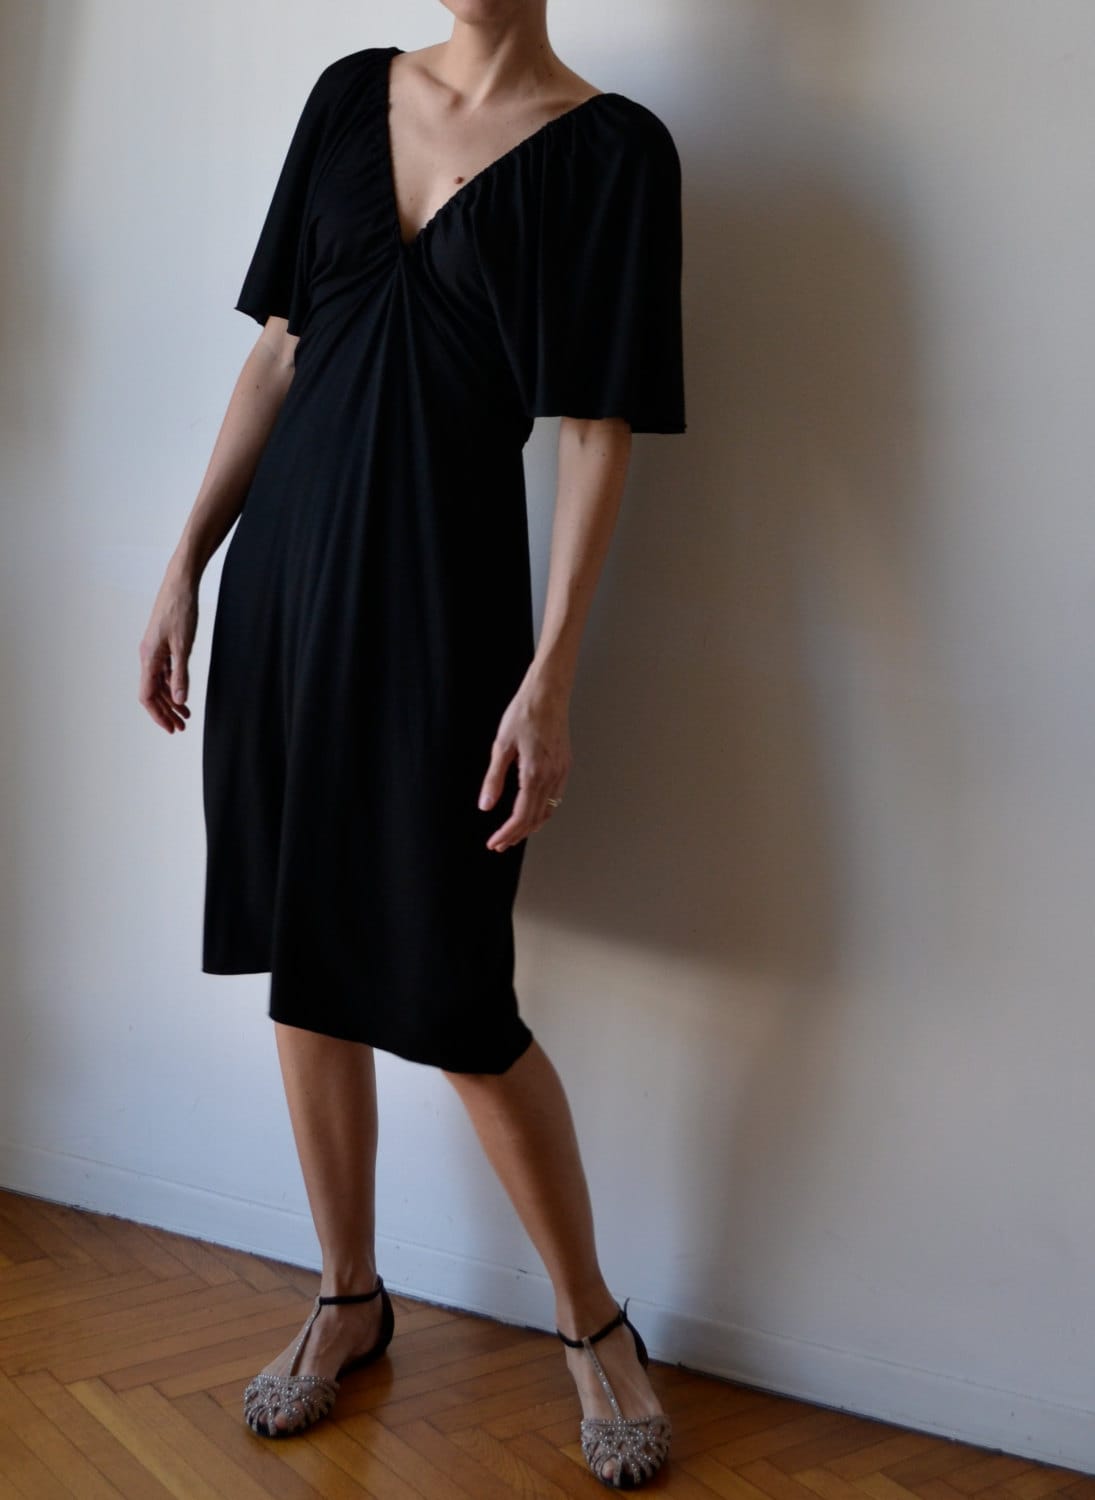 Midi length dresses with sleeves